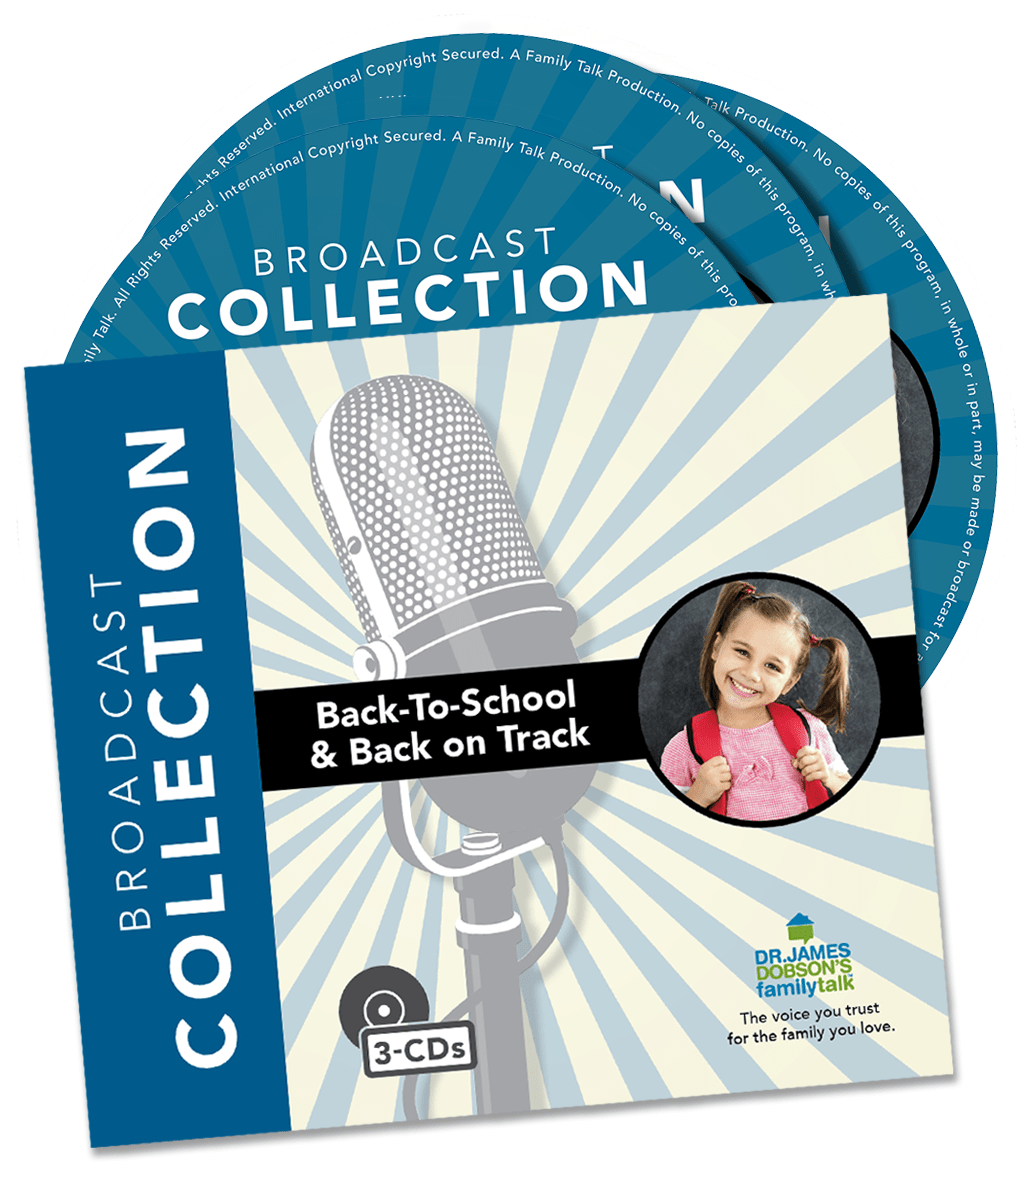 Back-to-School & Back on Track (3-CD Set) Product Photo